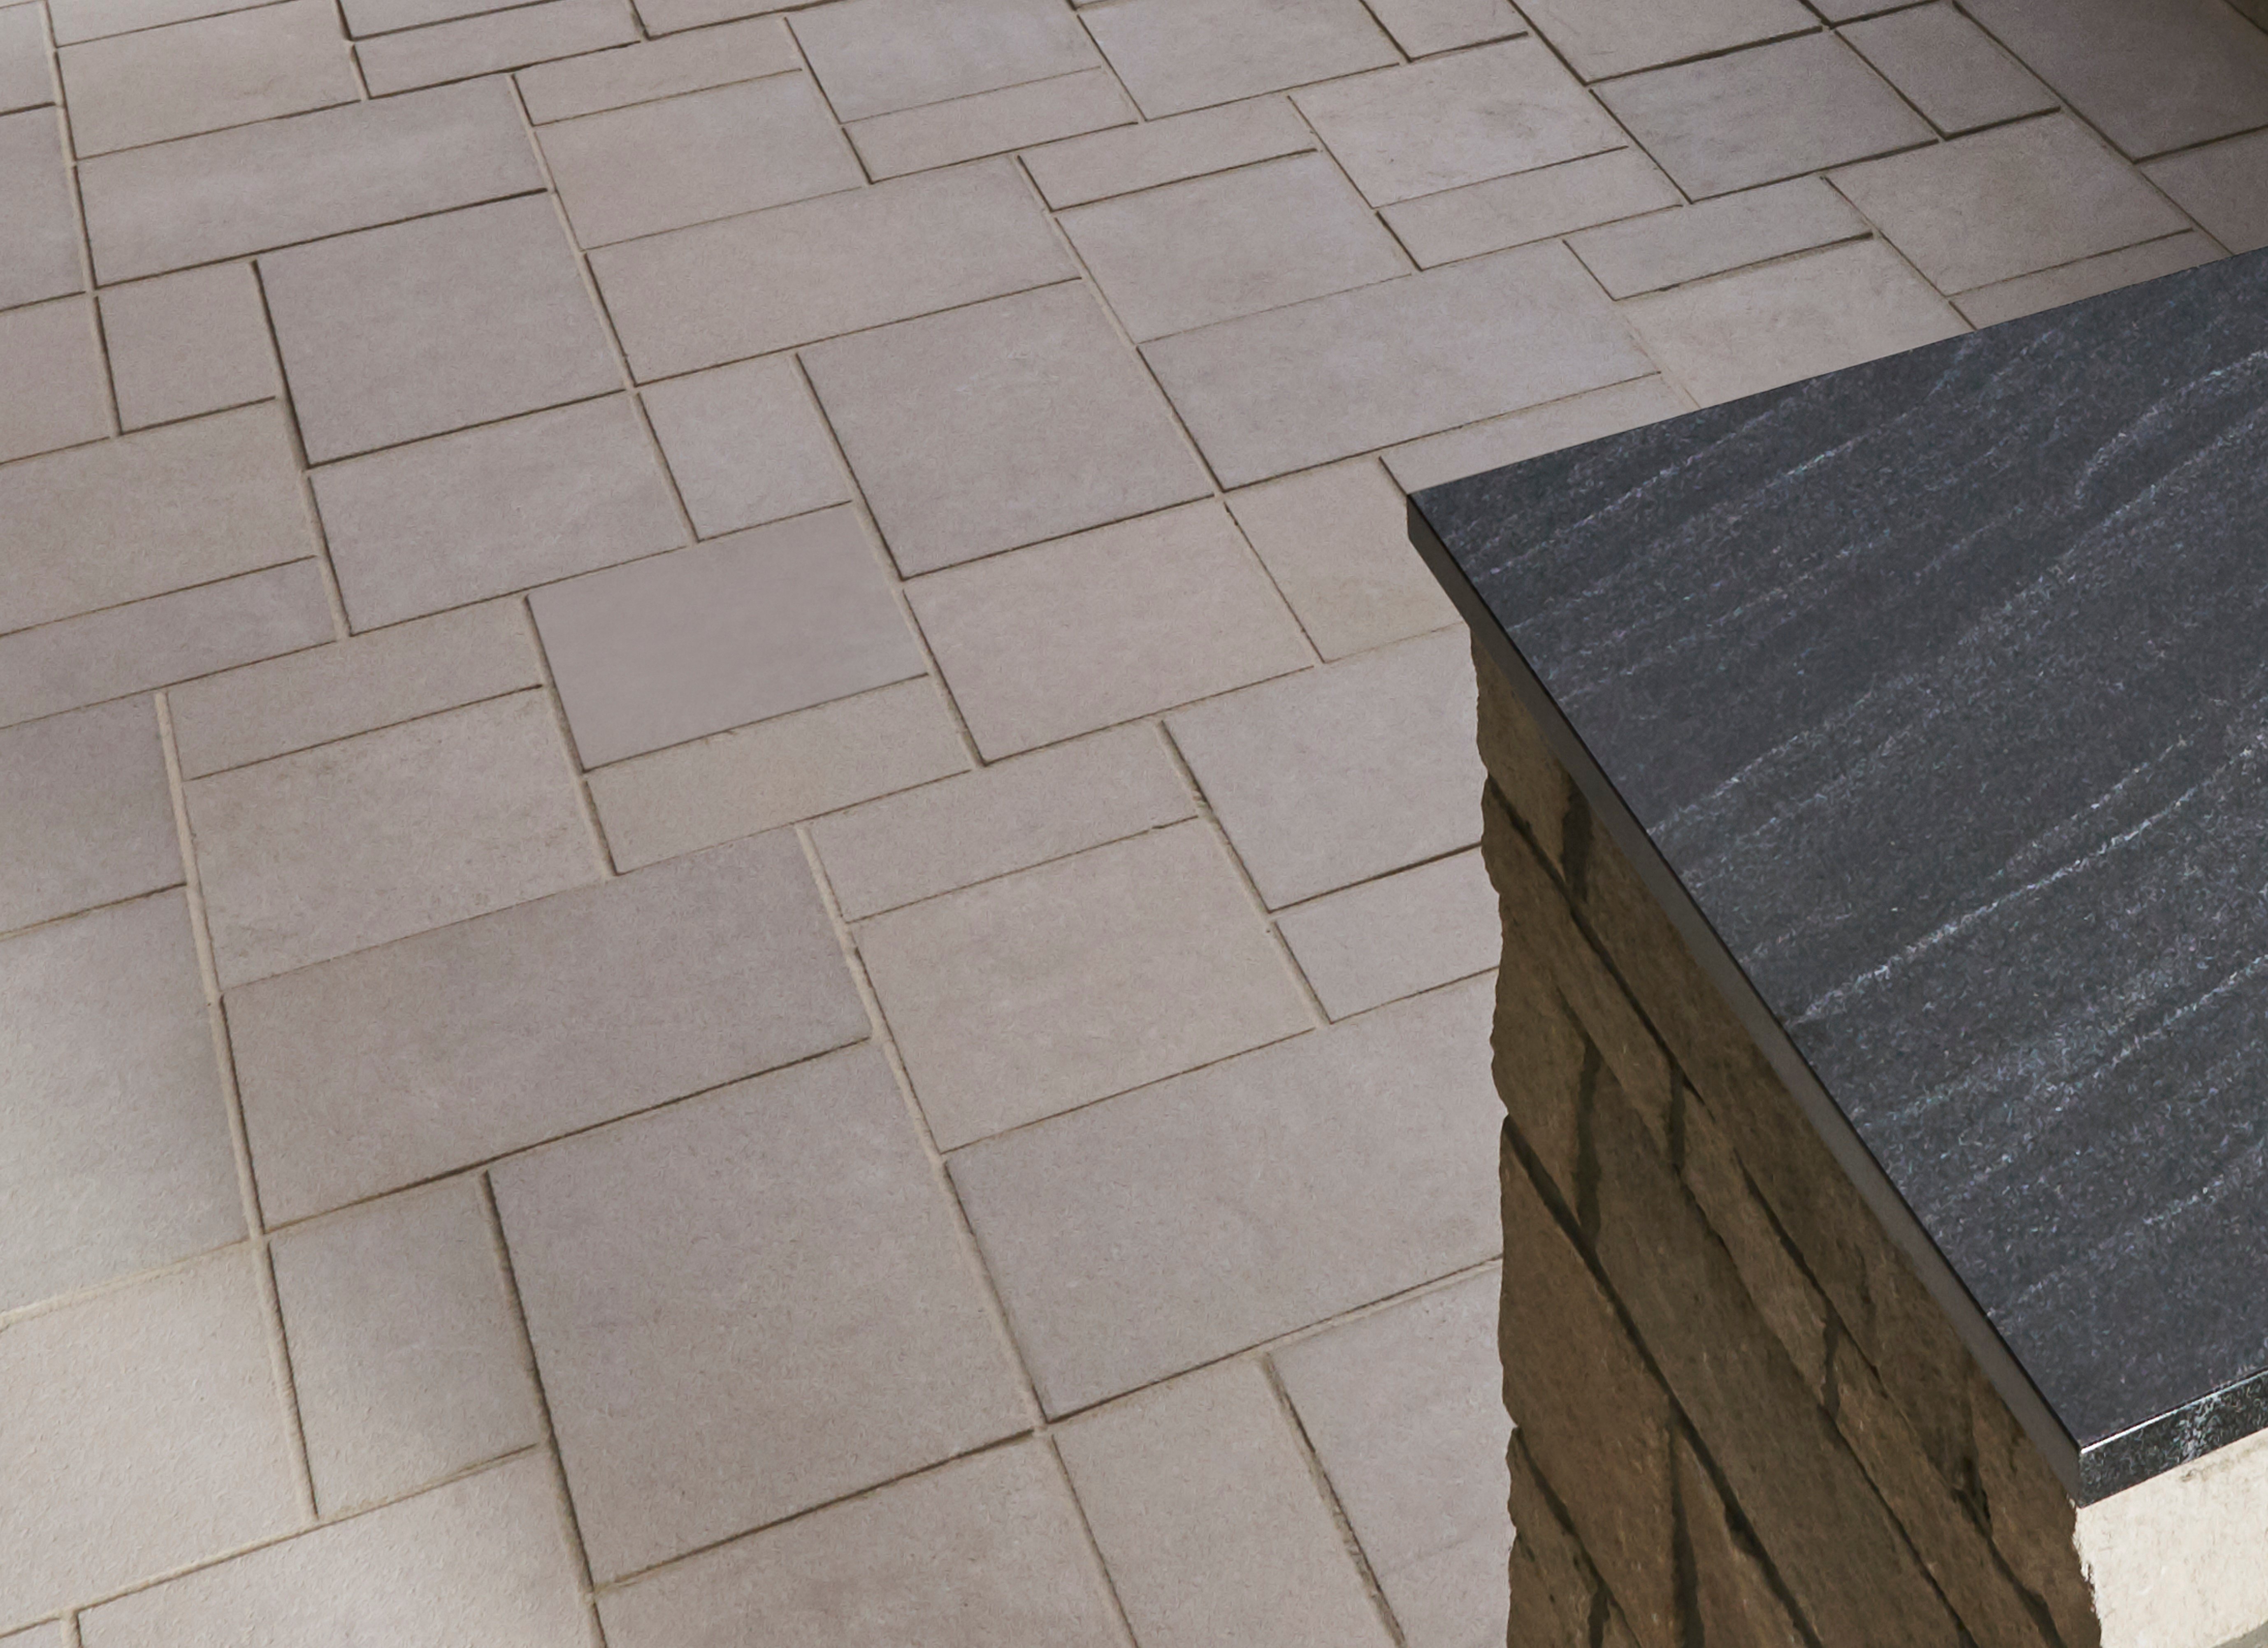 Indiana Limestone Full Color Blend pavers